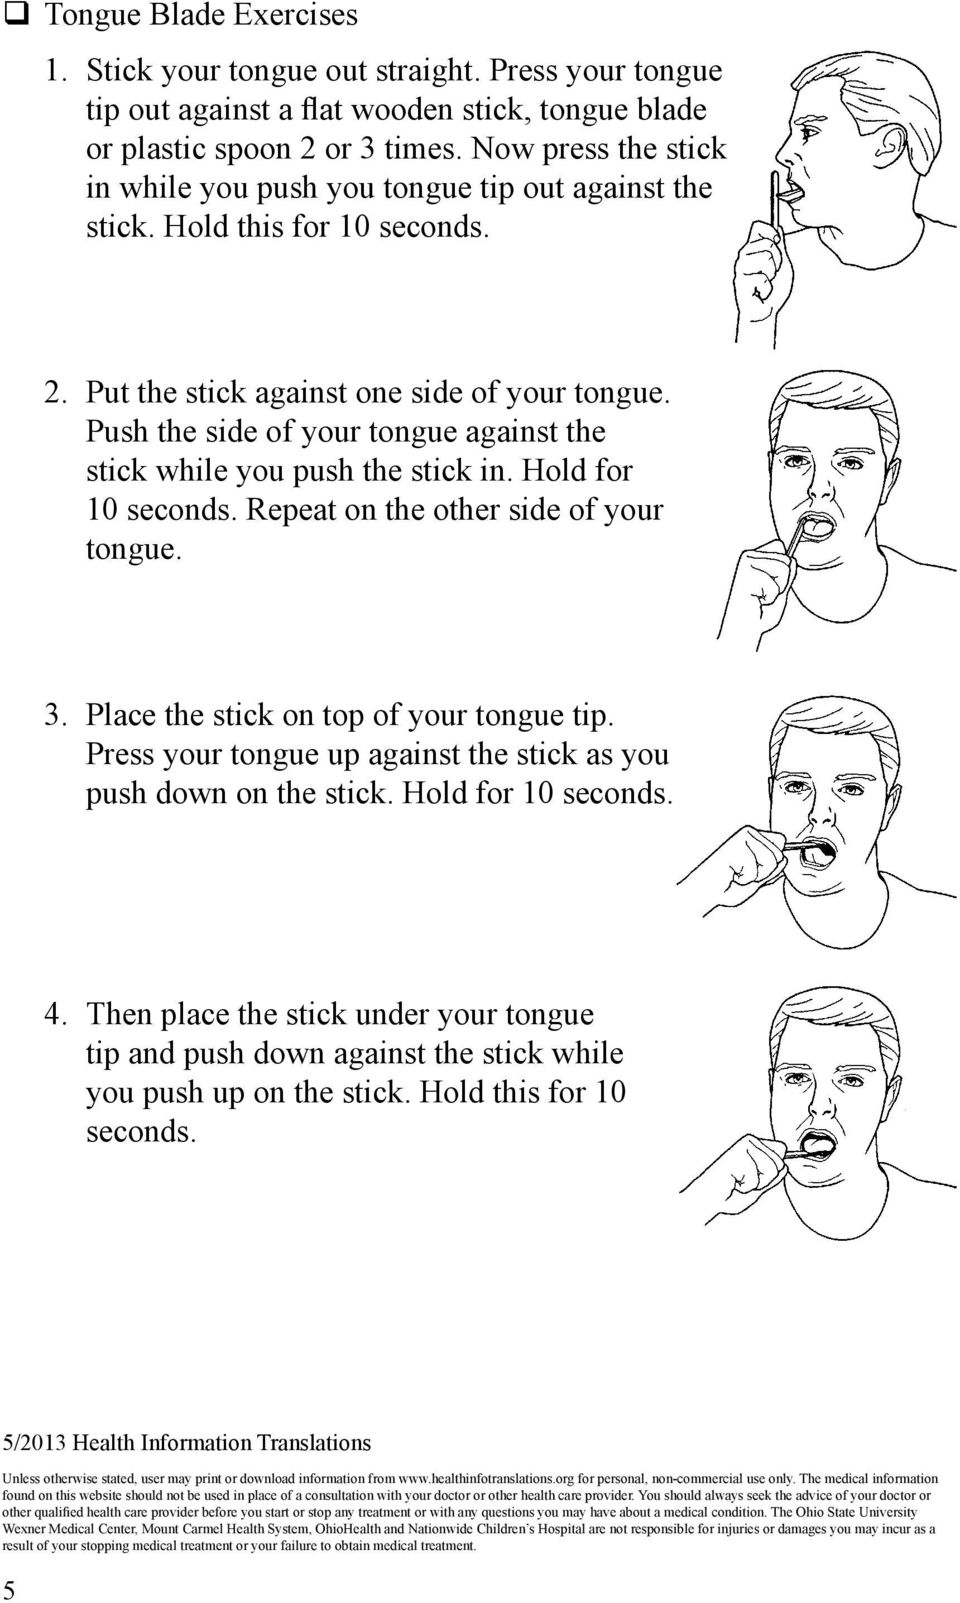 Push the side of your tongue against the stick while you push the stick in. Hold for 10 seconds. Repeat on the other side of your tongue. 3. Place the stick on top of your tongue tip.